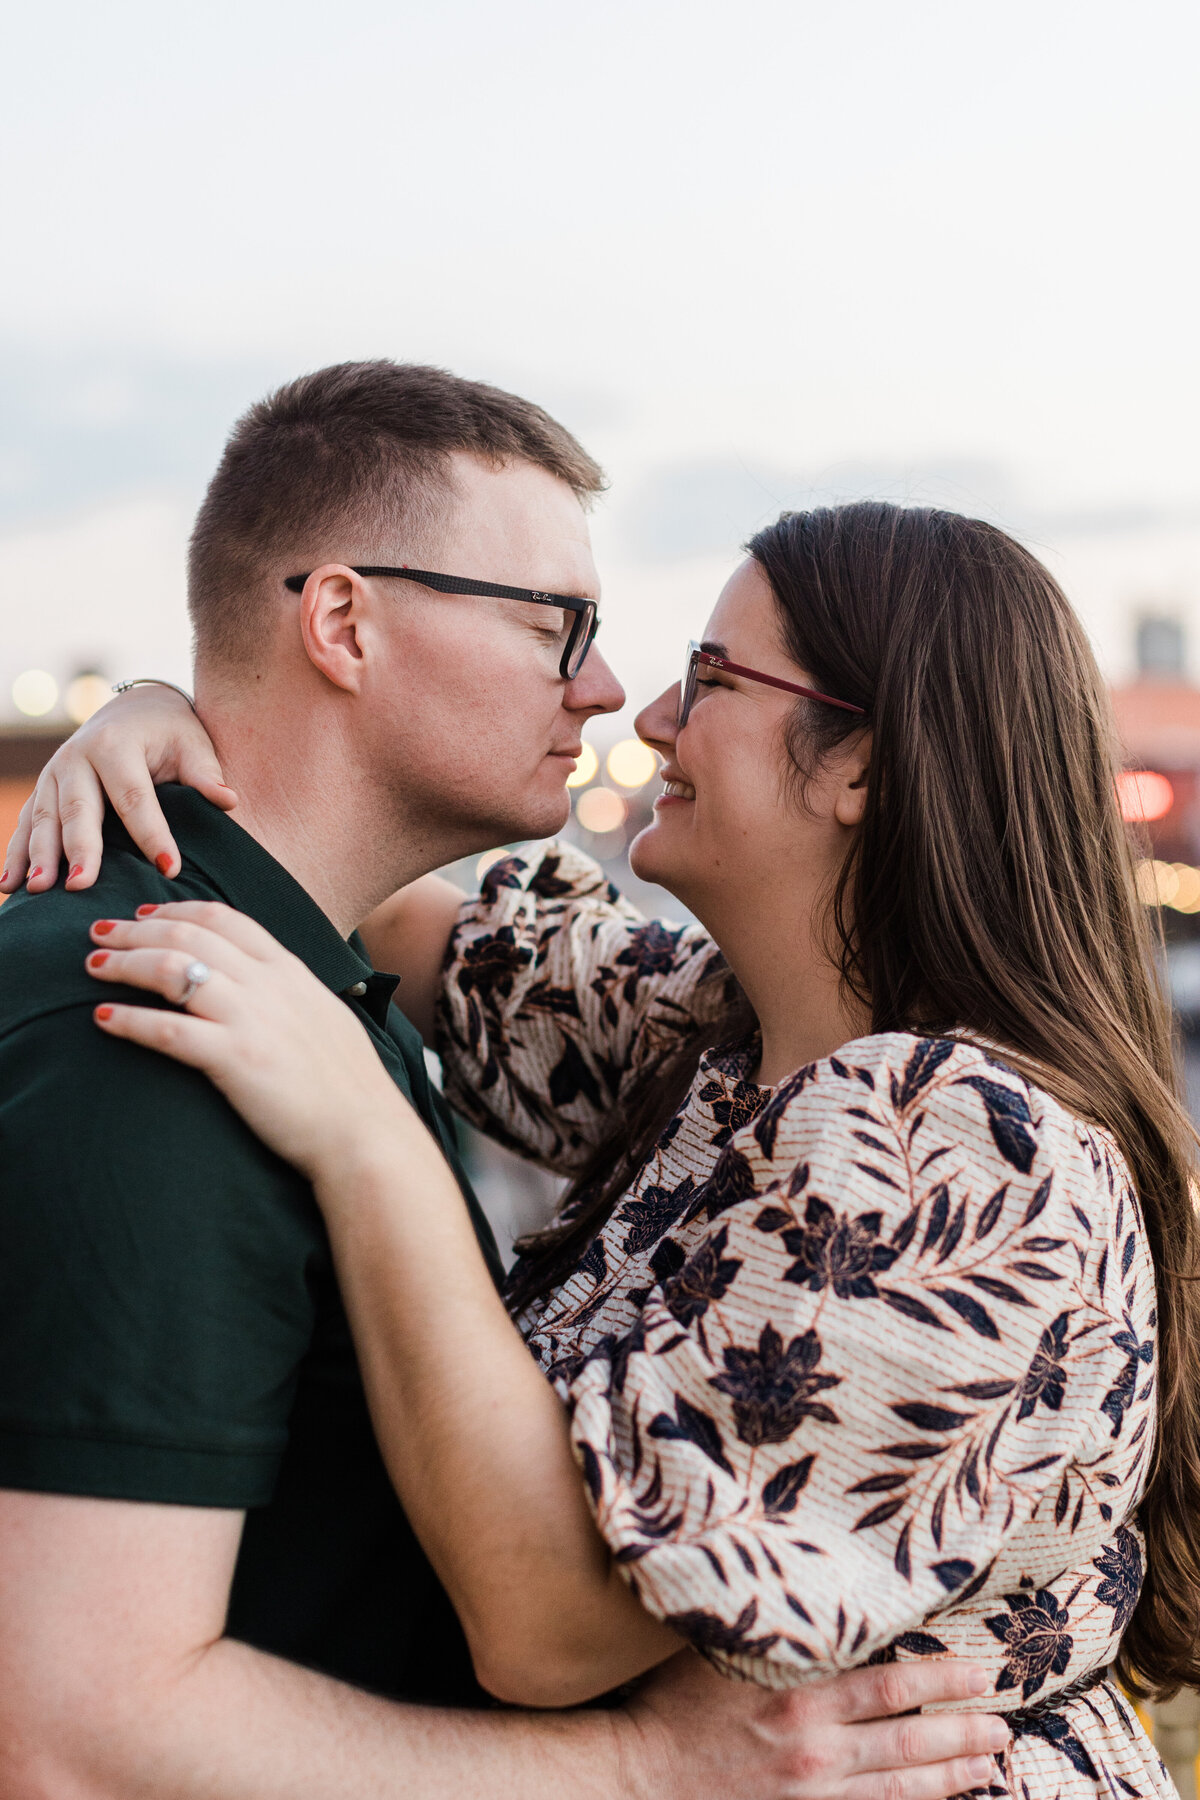 A couple holding each other close and preparing to kiss during their engagement session in Grapevine, Texas. The woman on the right is wearing a white dress covered in dark flowers and glasses. Her left arm is placed on the man's shoulder, so her engagement ring can be seen. The man on the left is wearing a dark green shirt and glasses.